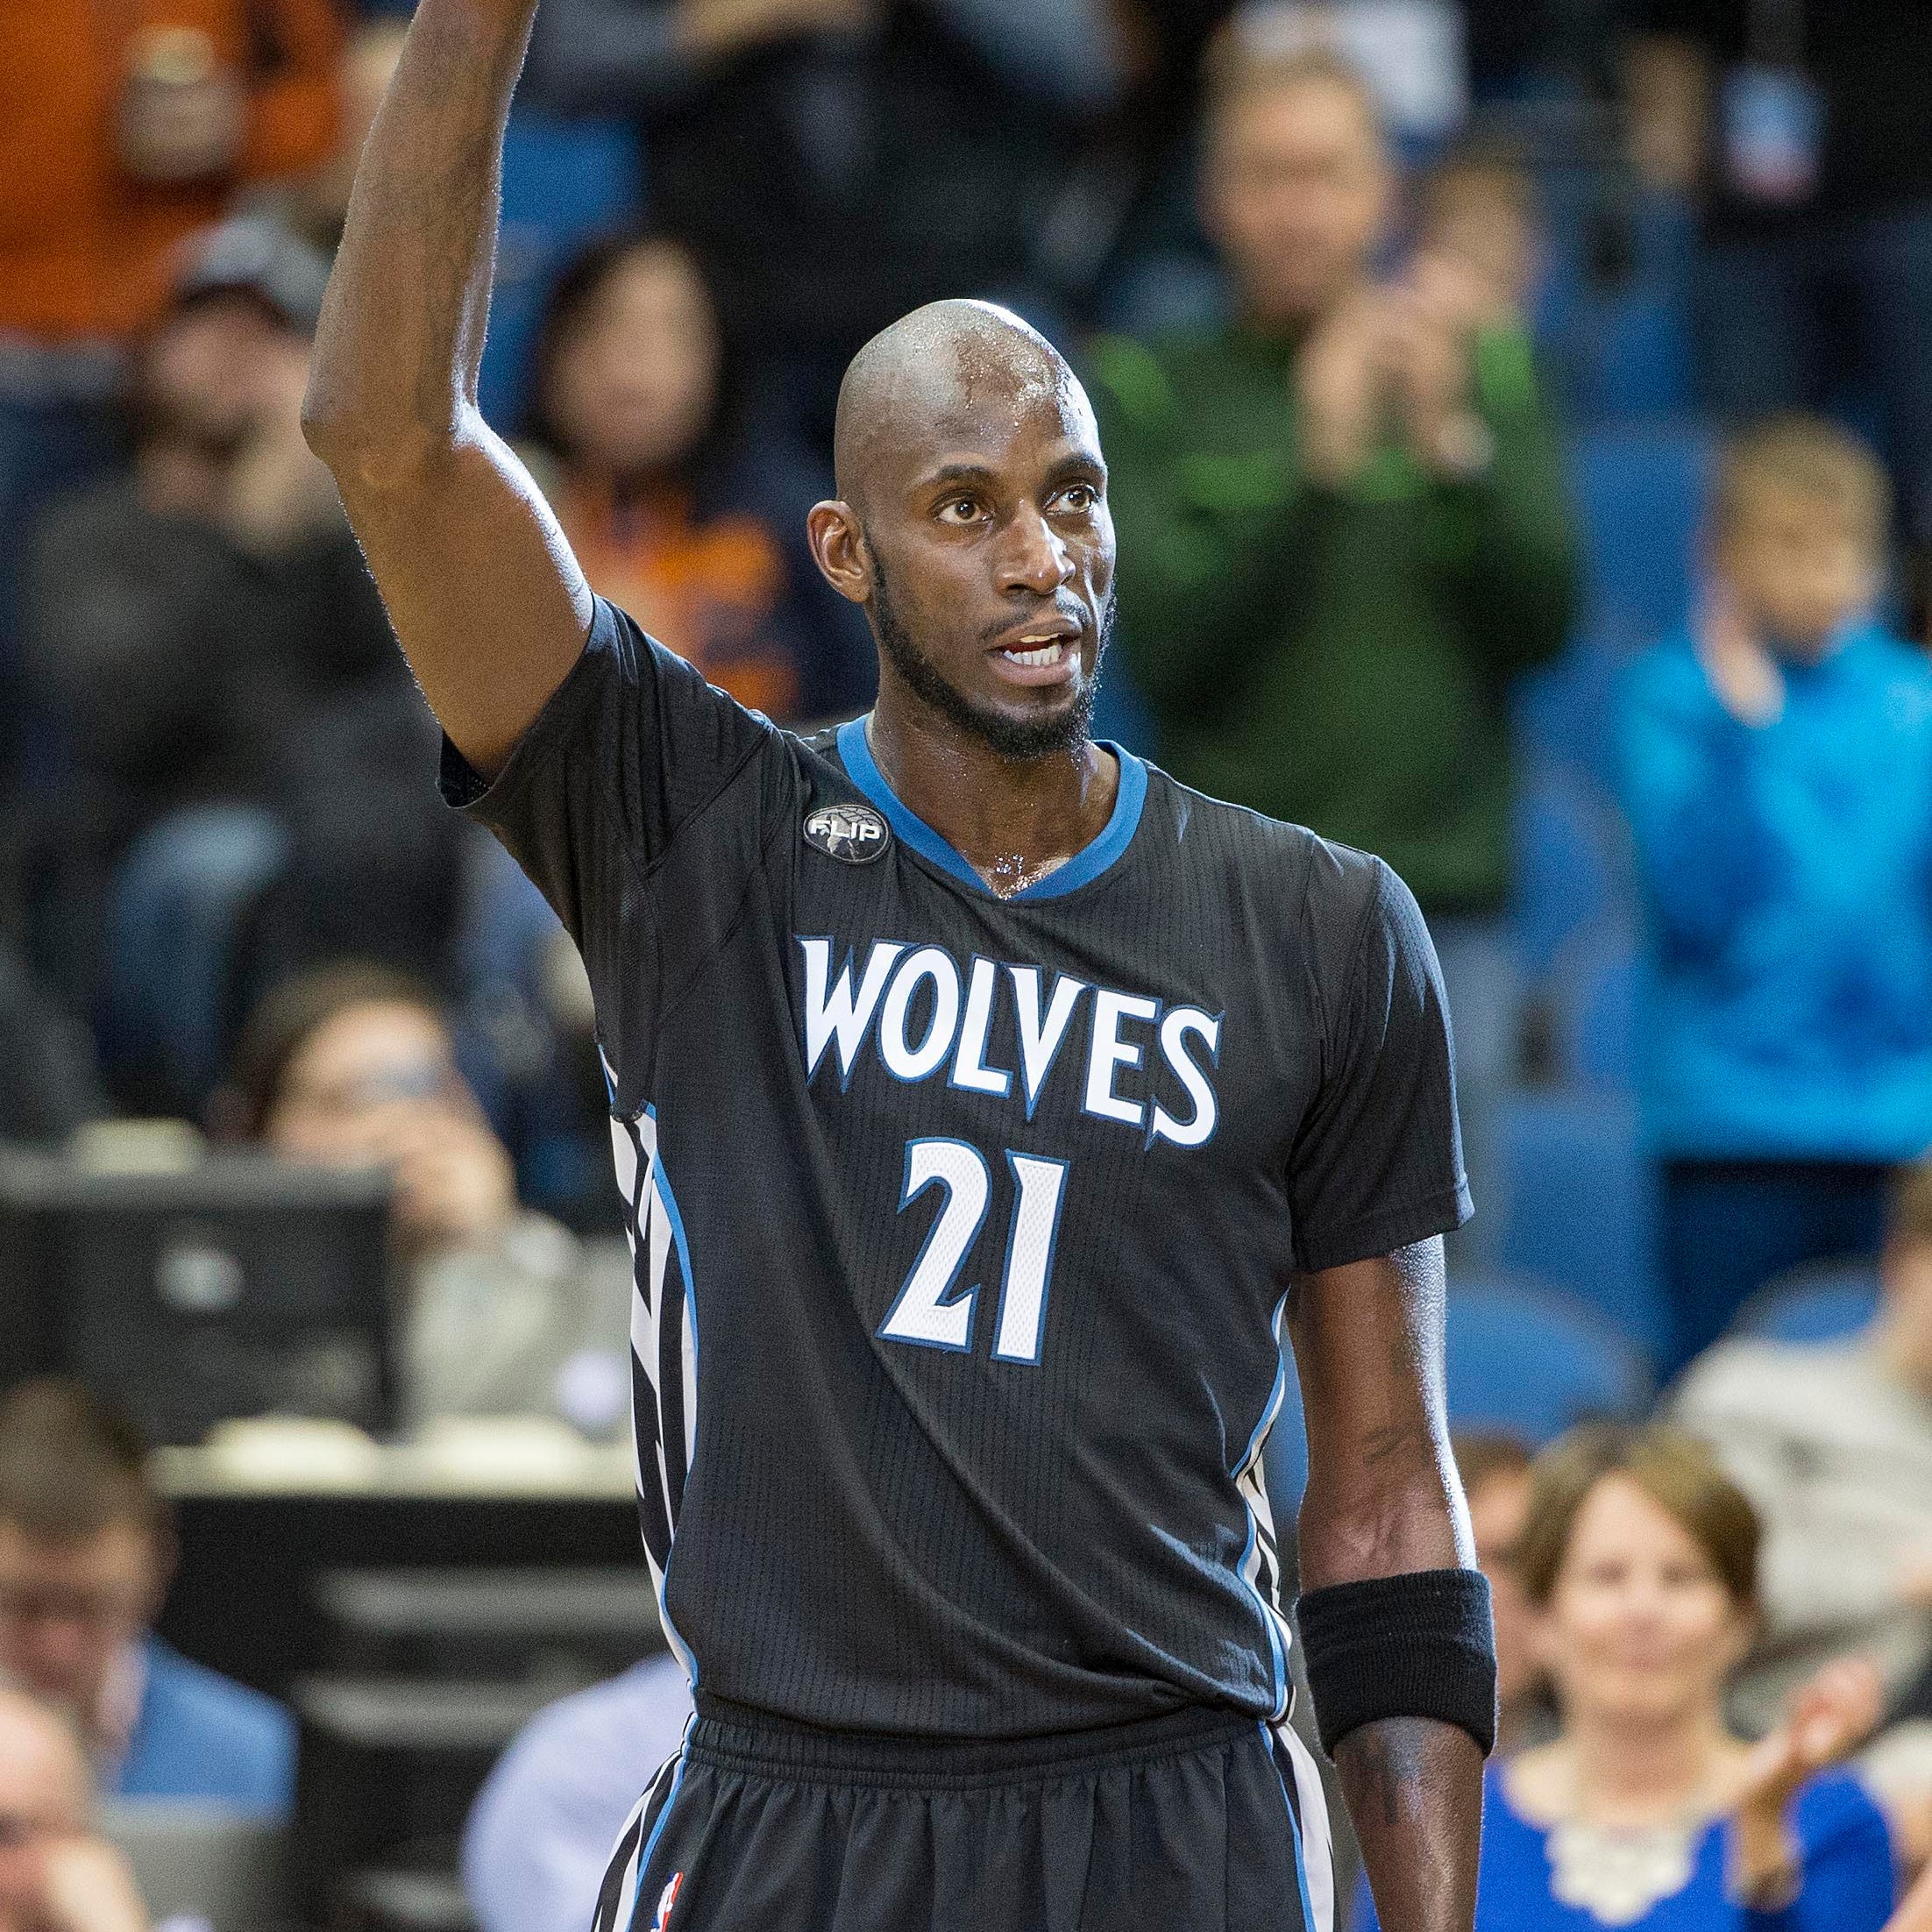 Minnesota Timberwolves forward Kevin Garnett waves to fans during a stoppage in play.